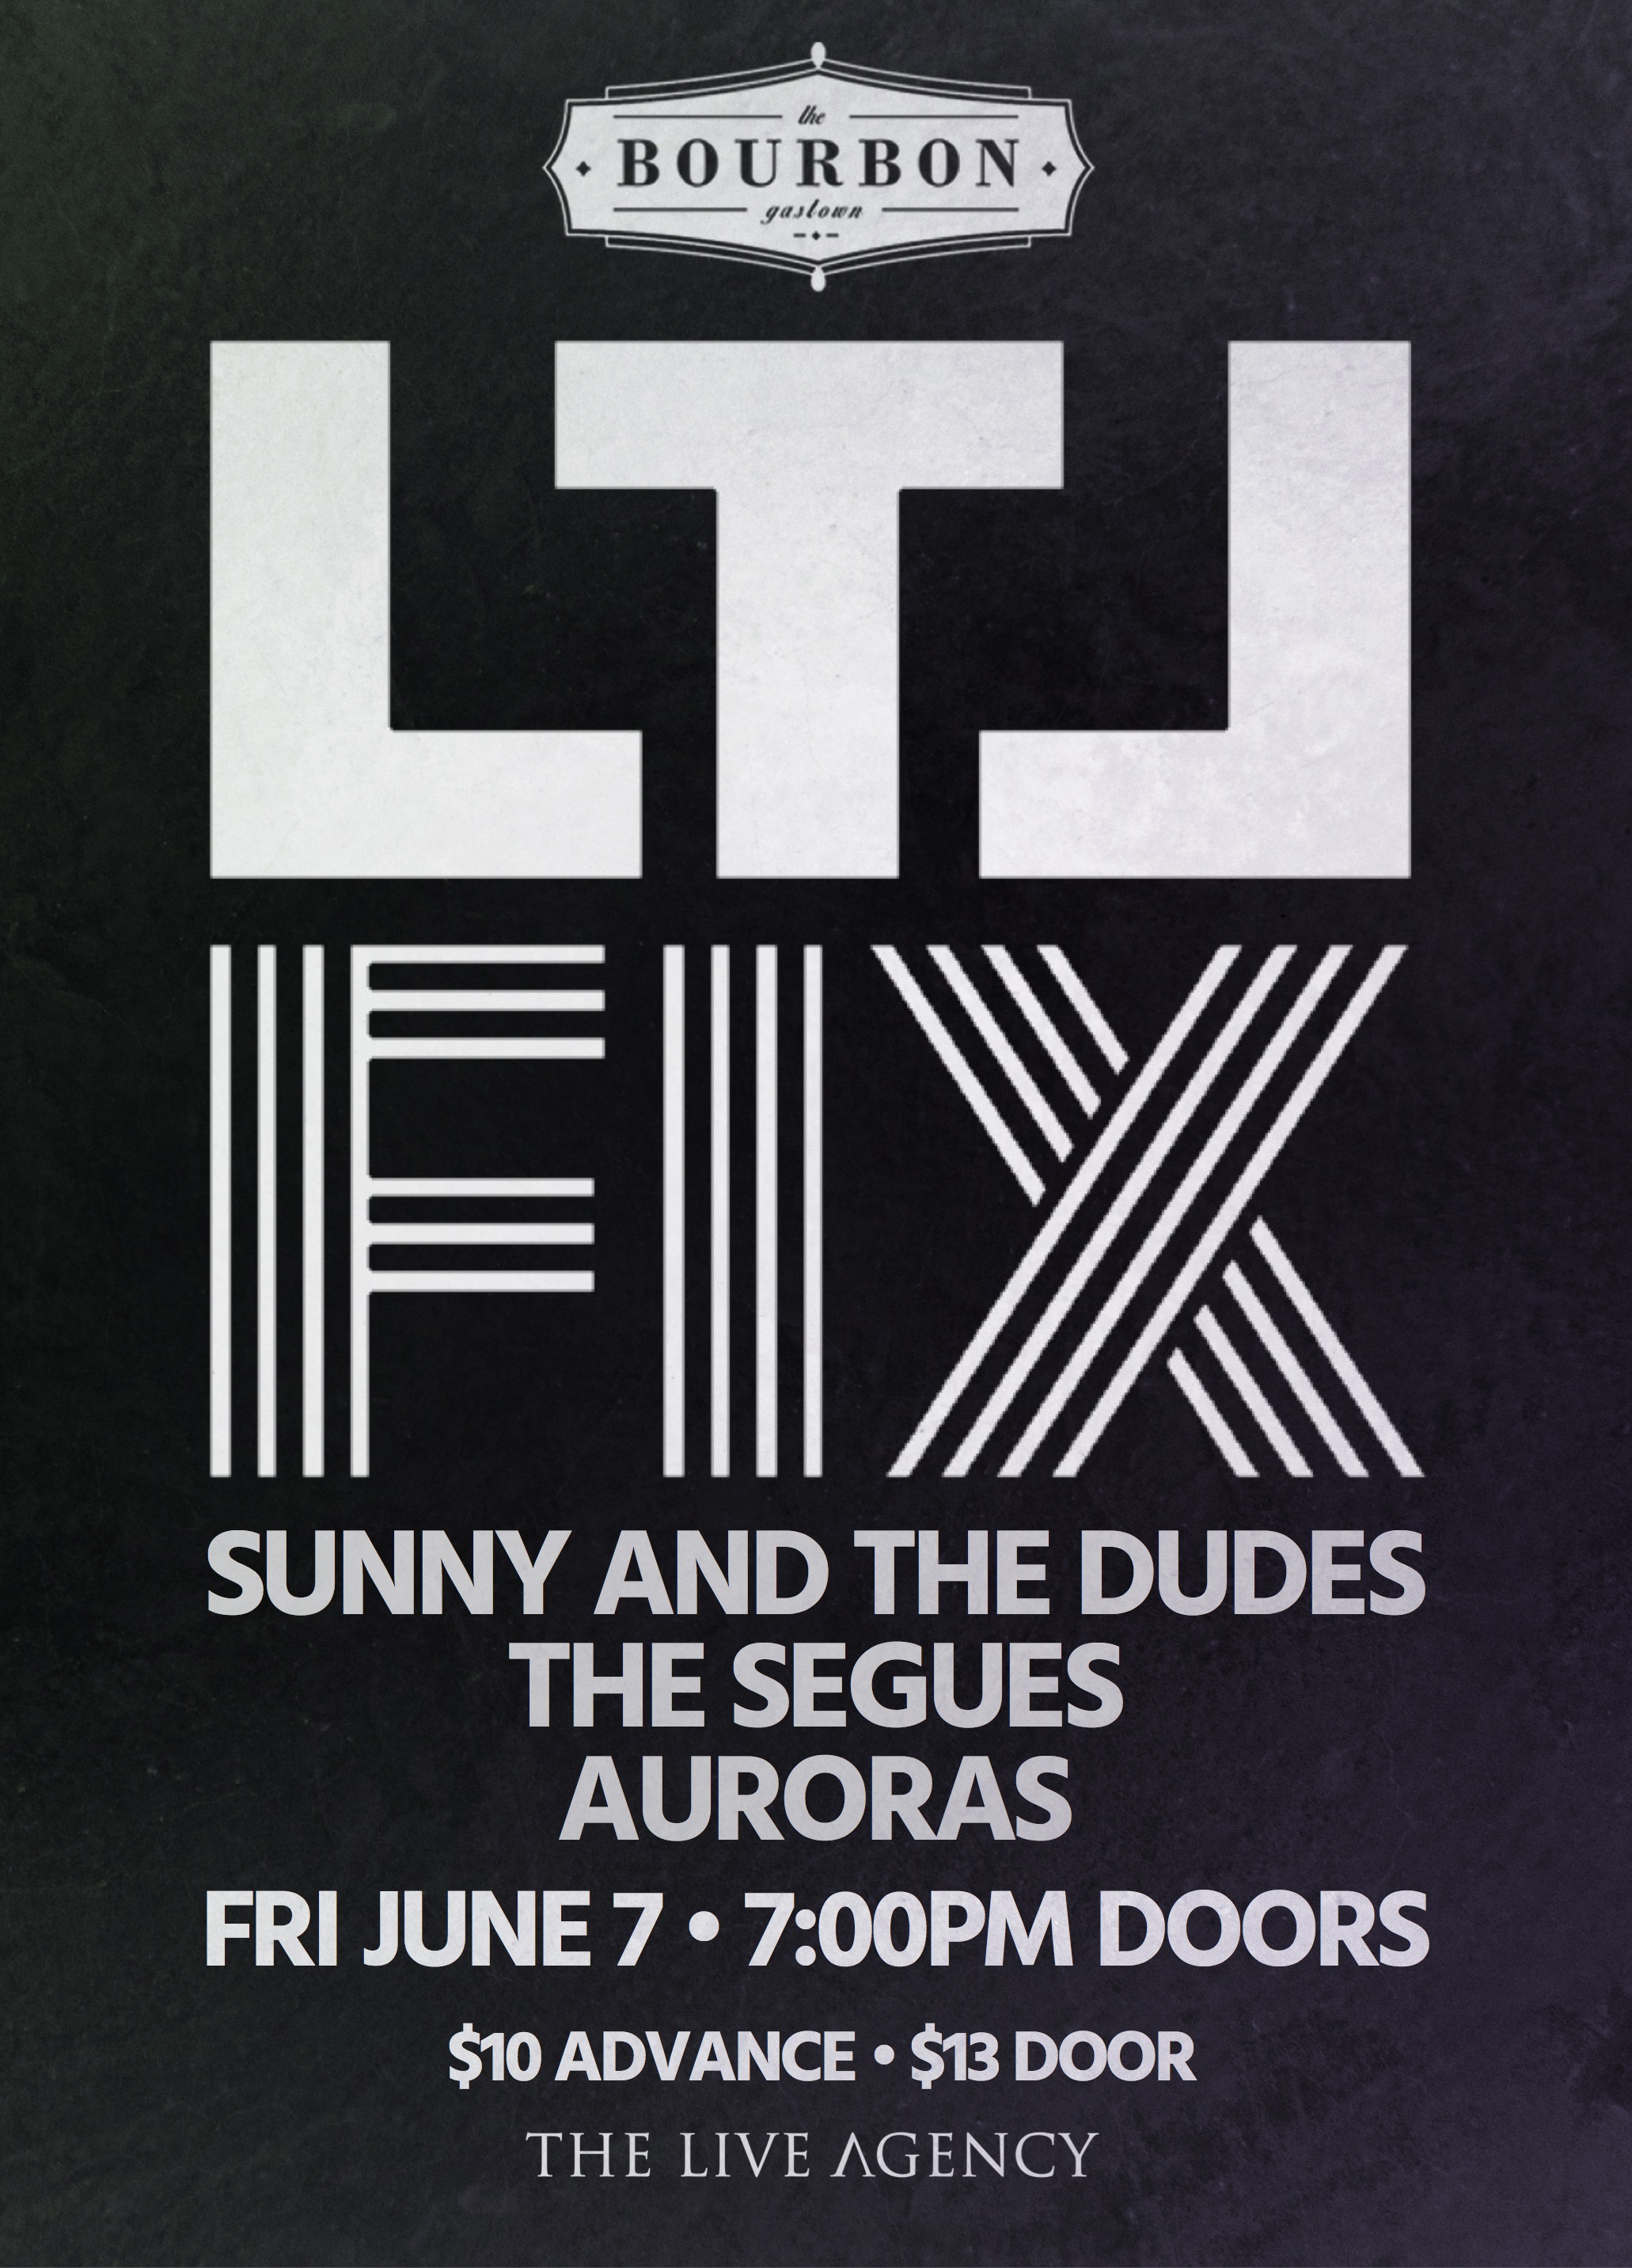 Little Fix with Sunny and the Dudes, The Segues & Auroras